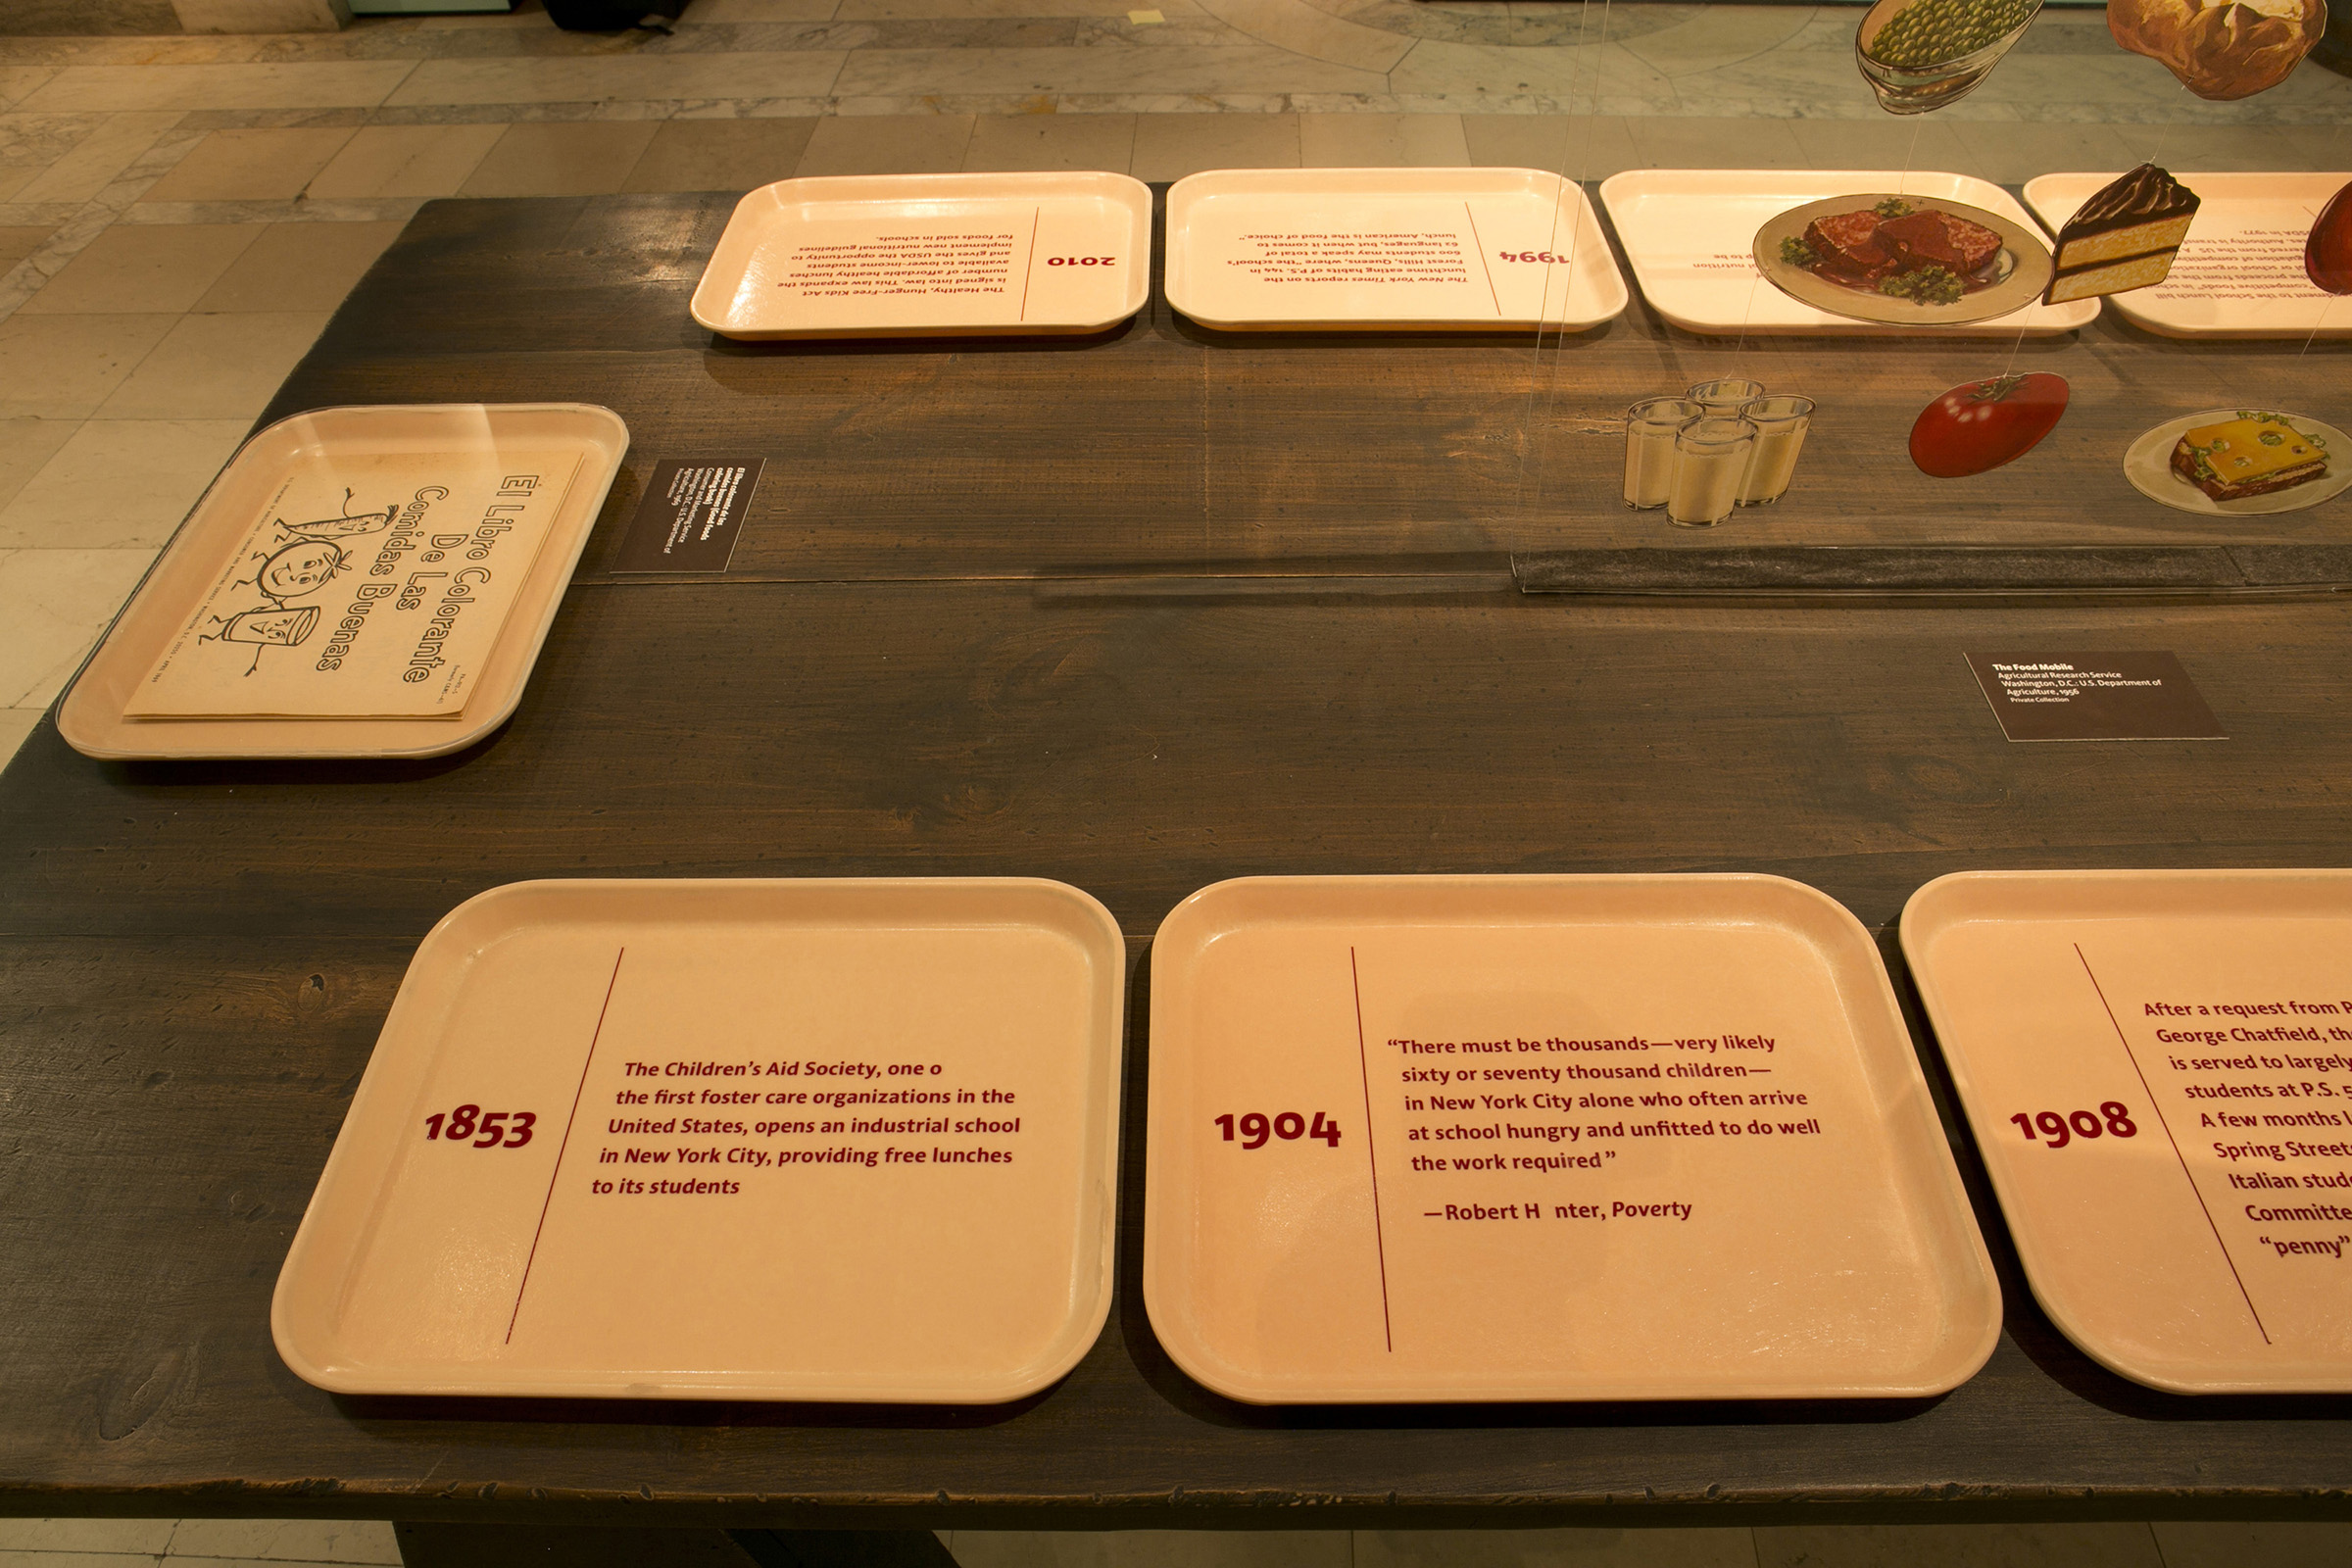 Lunch Hour - A timeline of charitable meals for children was displayed on lunch trays.